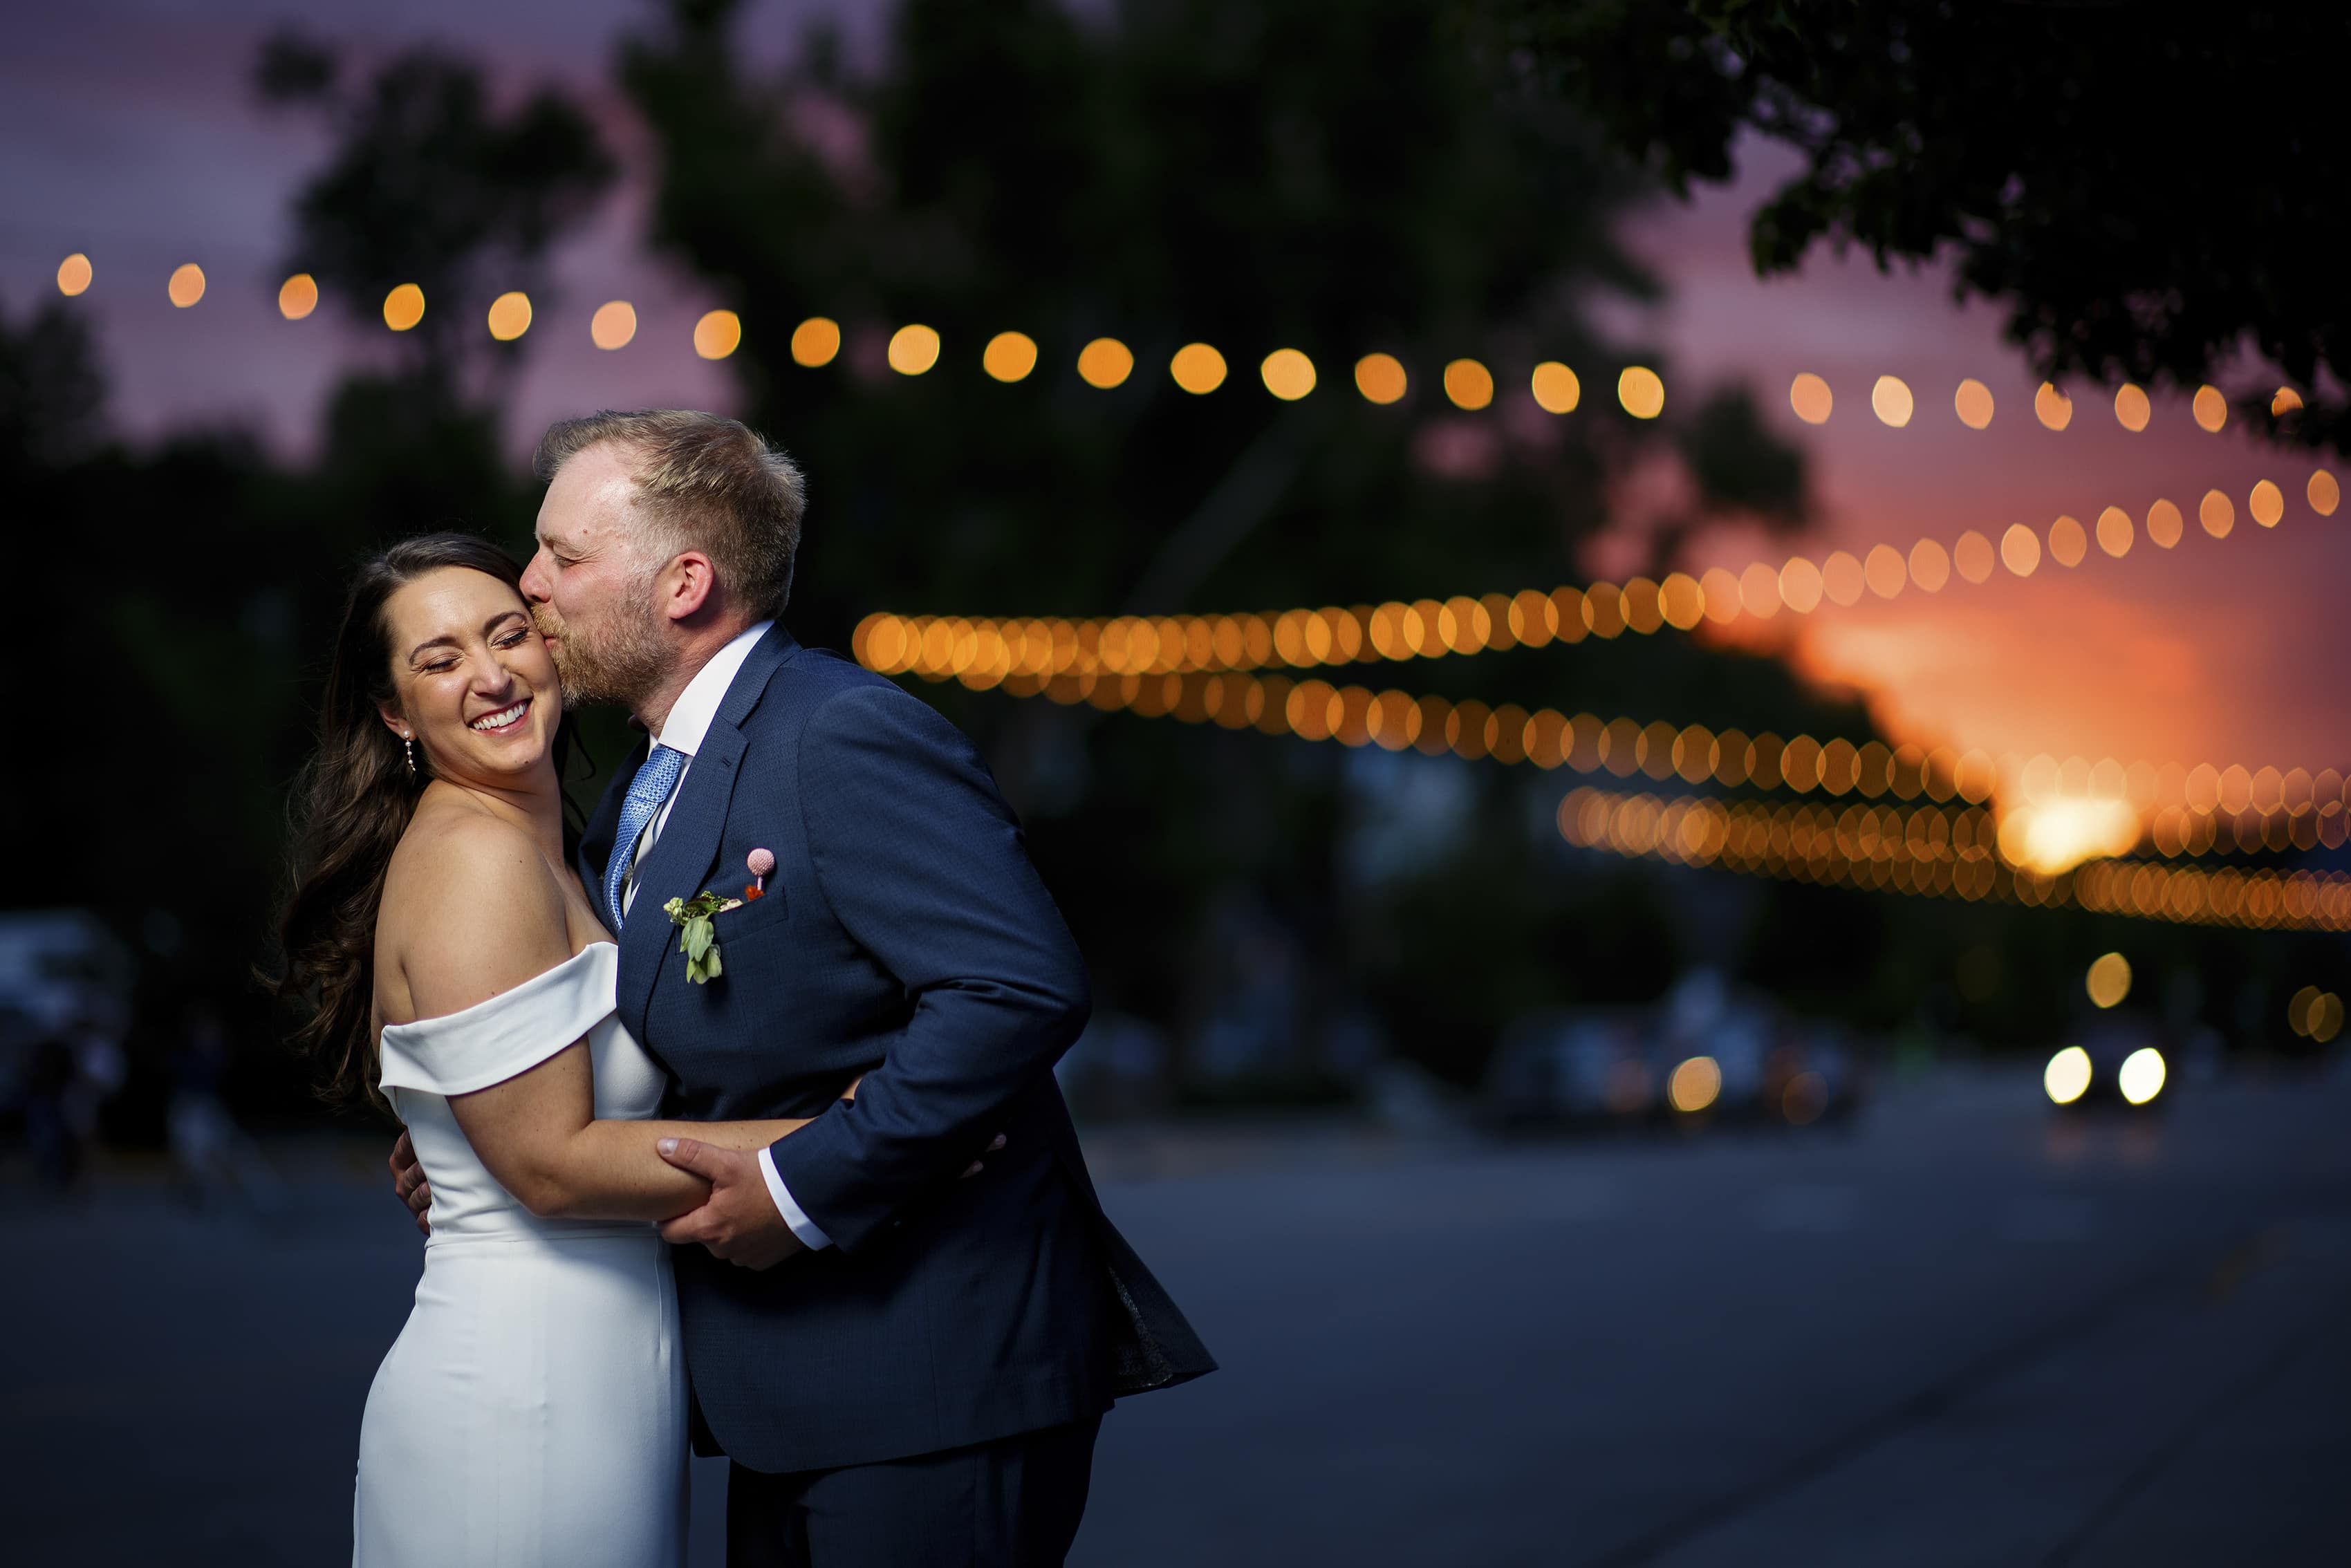 The groom kisses the bride as they pose for a photo on Yampa Street under the market lights at sunset in Steamboat Springs